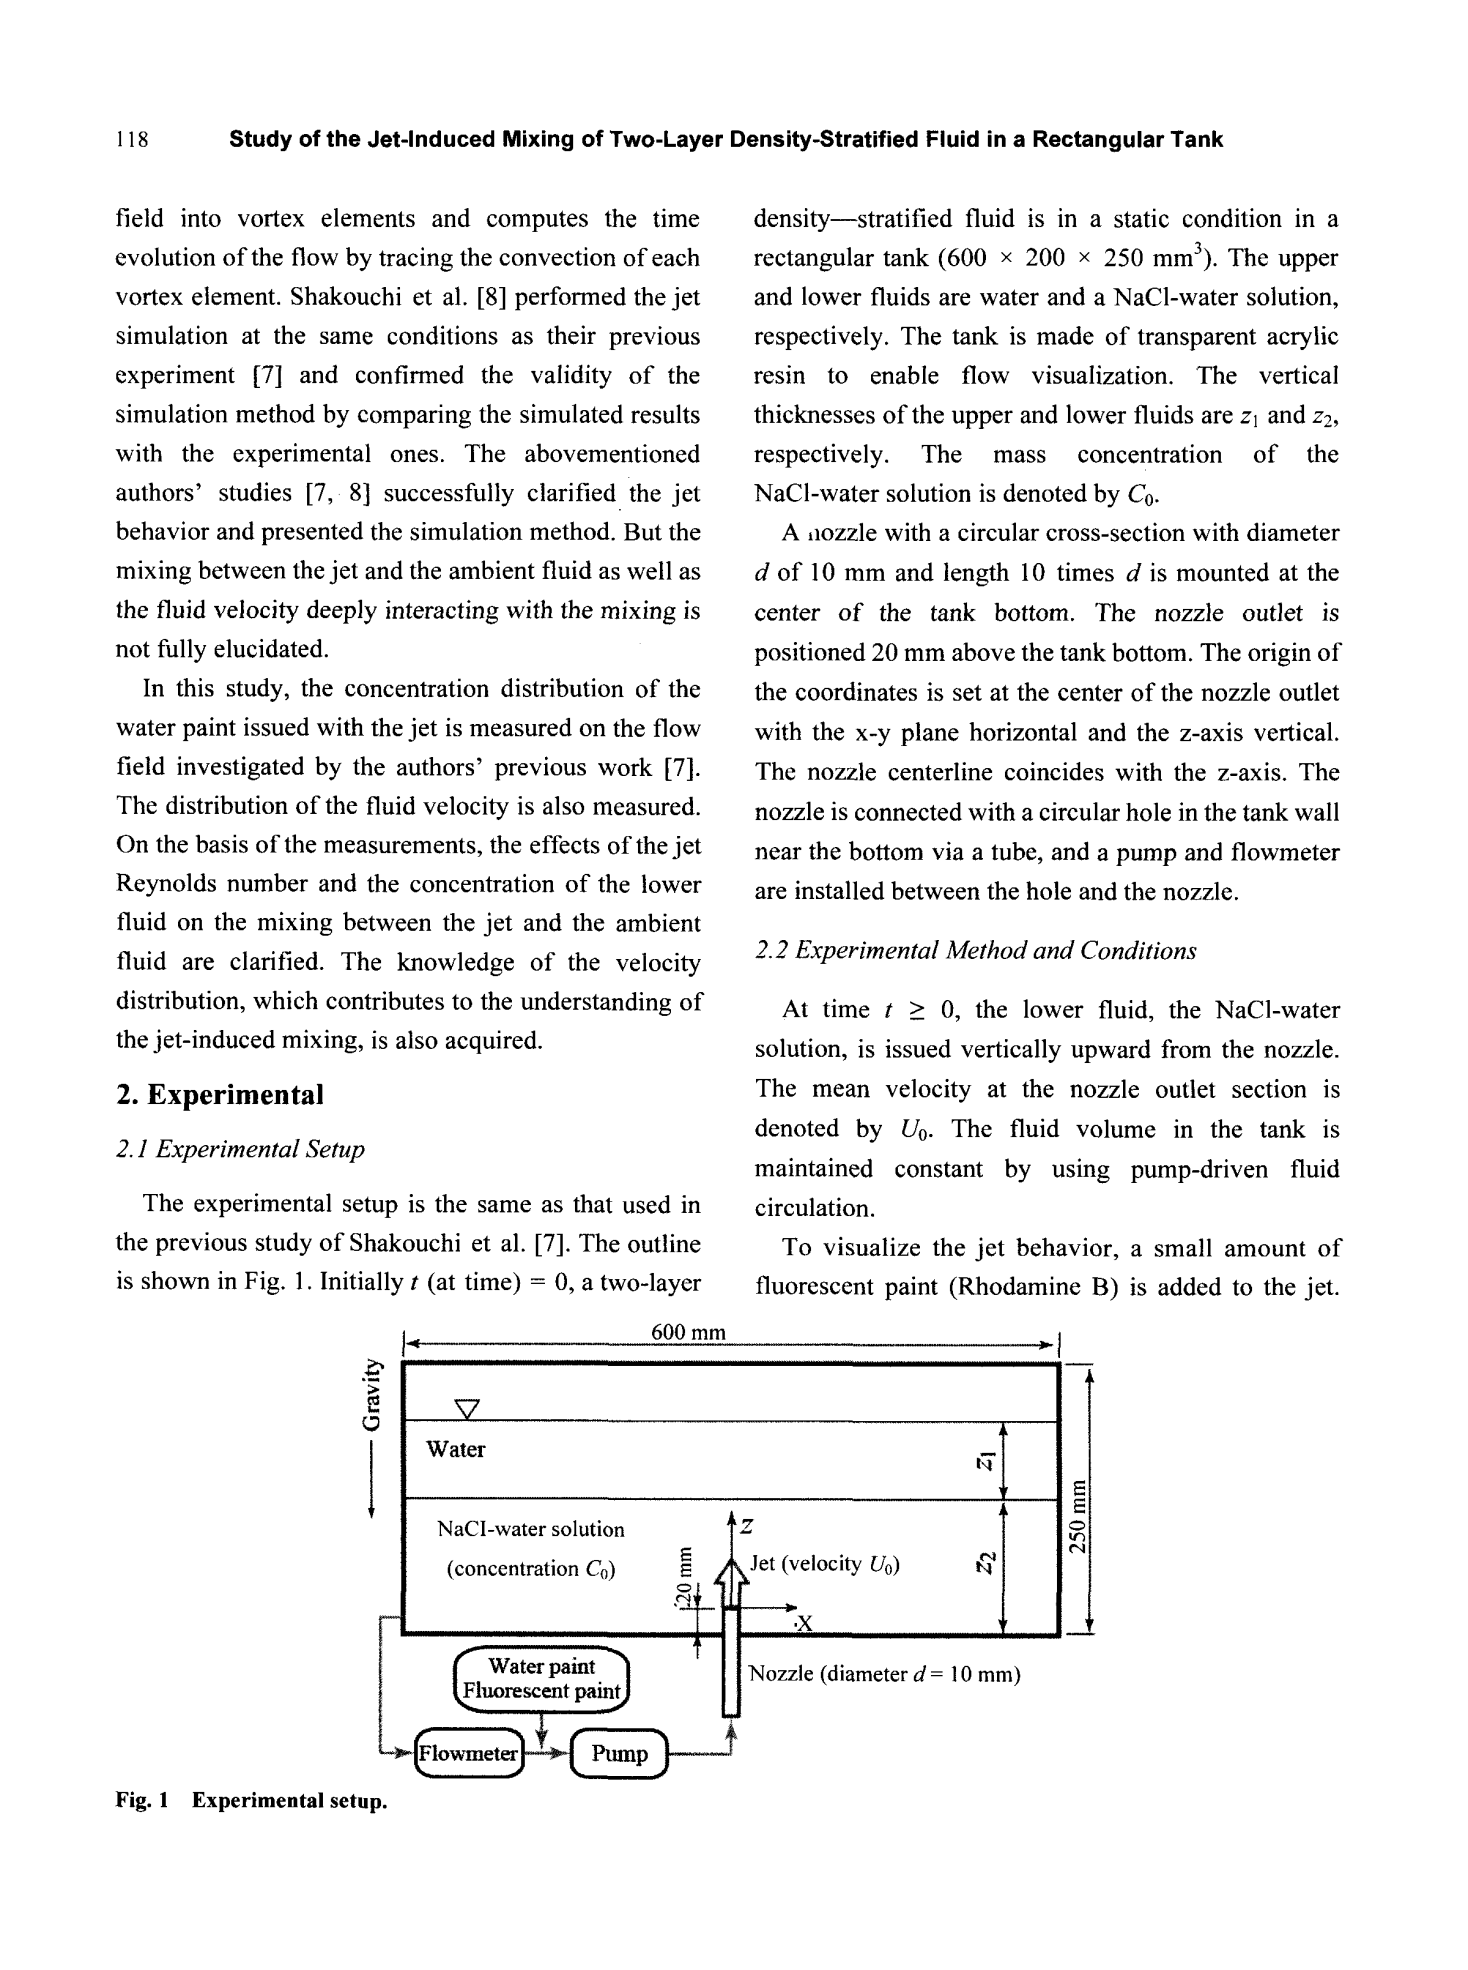 Study of the Jet-Induced Mixing of Two-Layer Density-Stratified Fluid in a Rectangular Tank